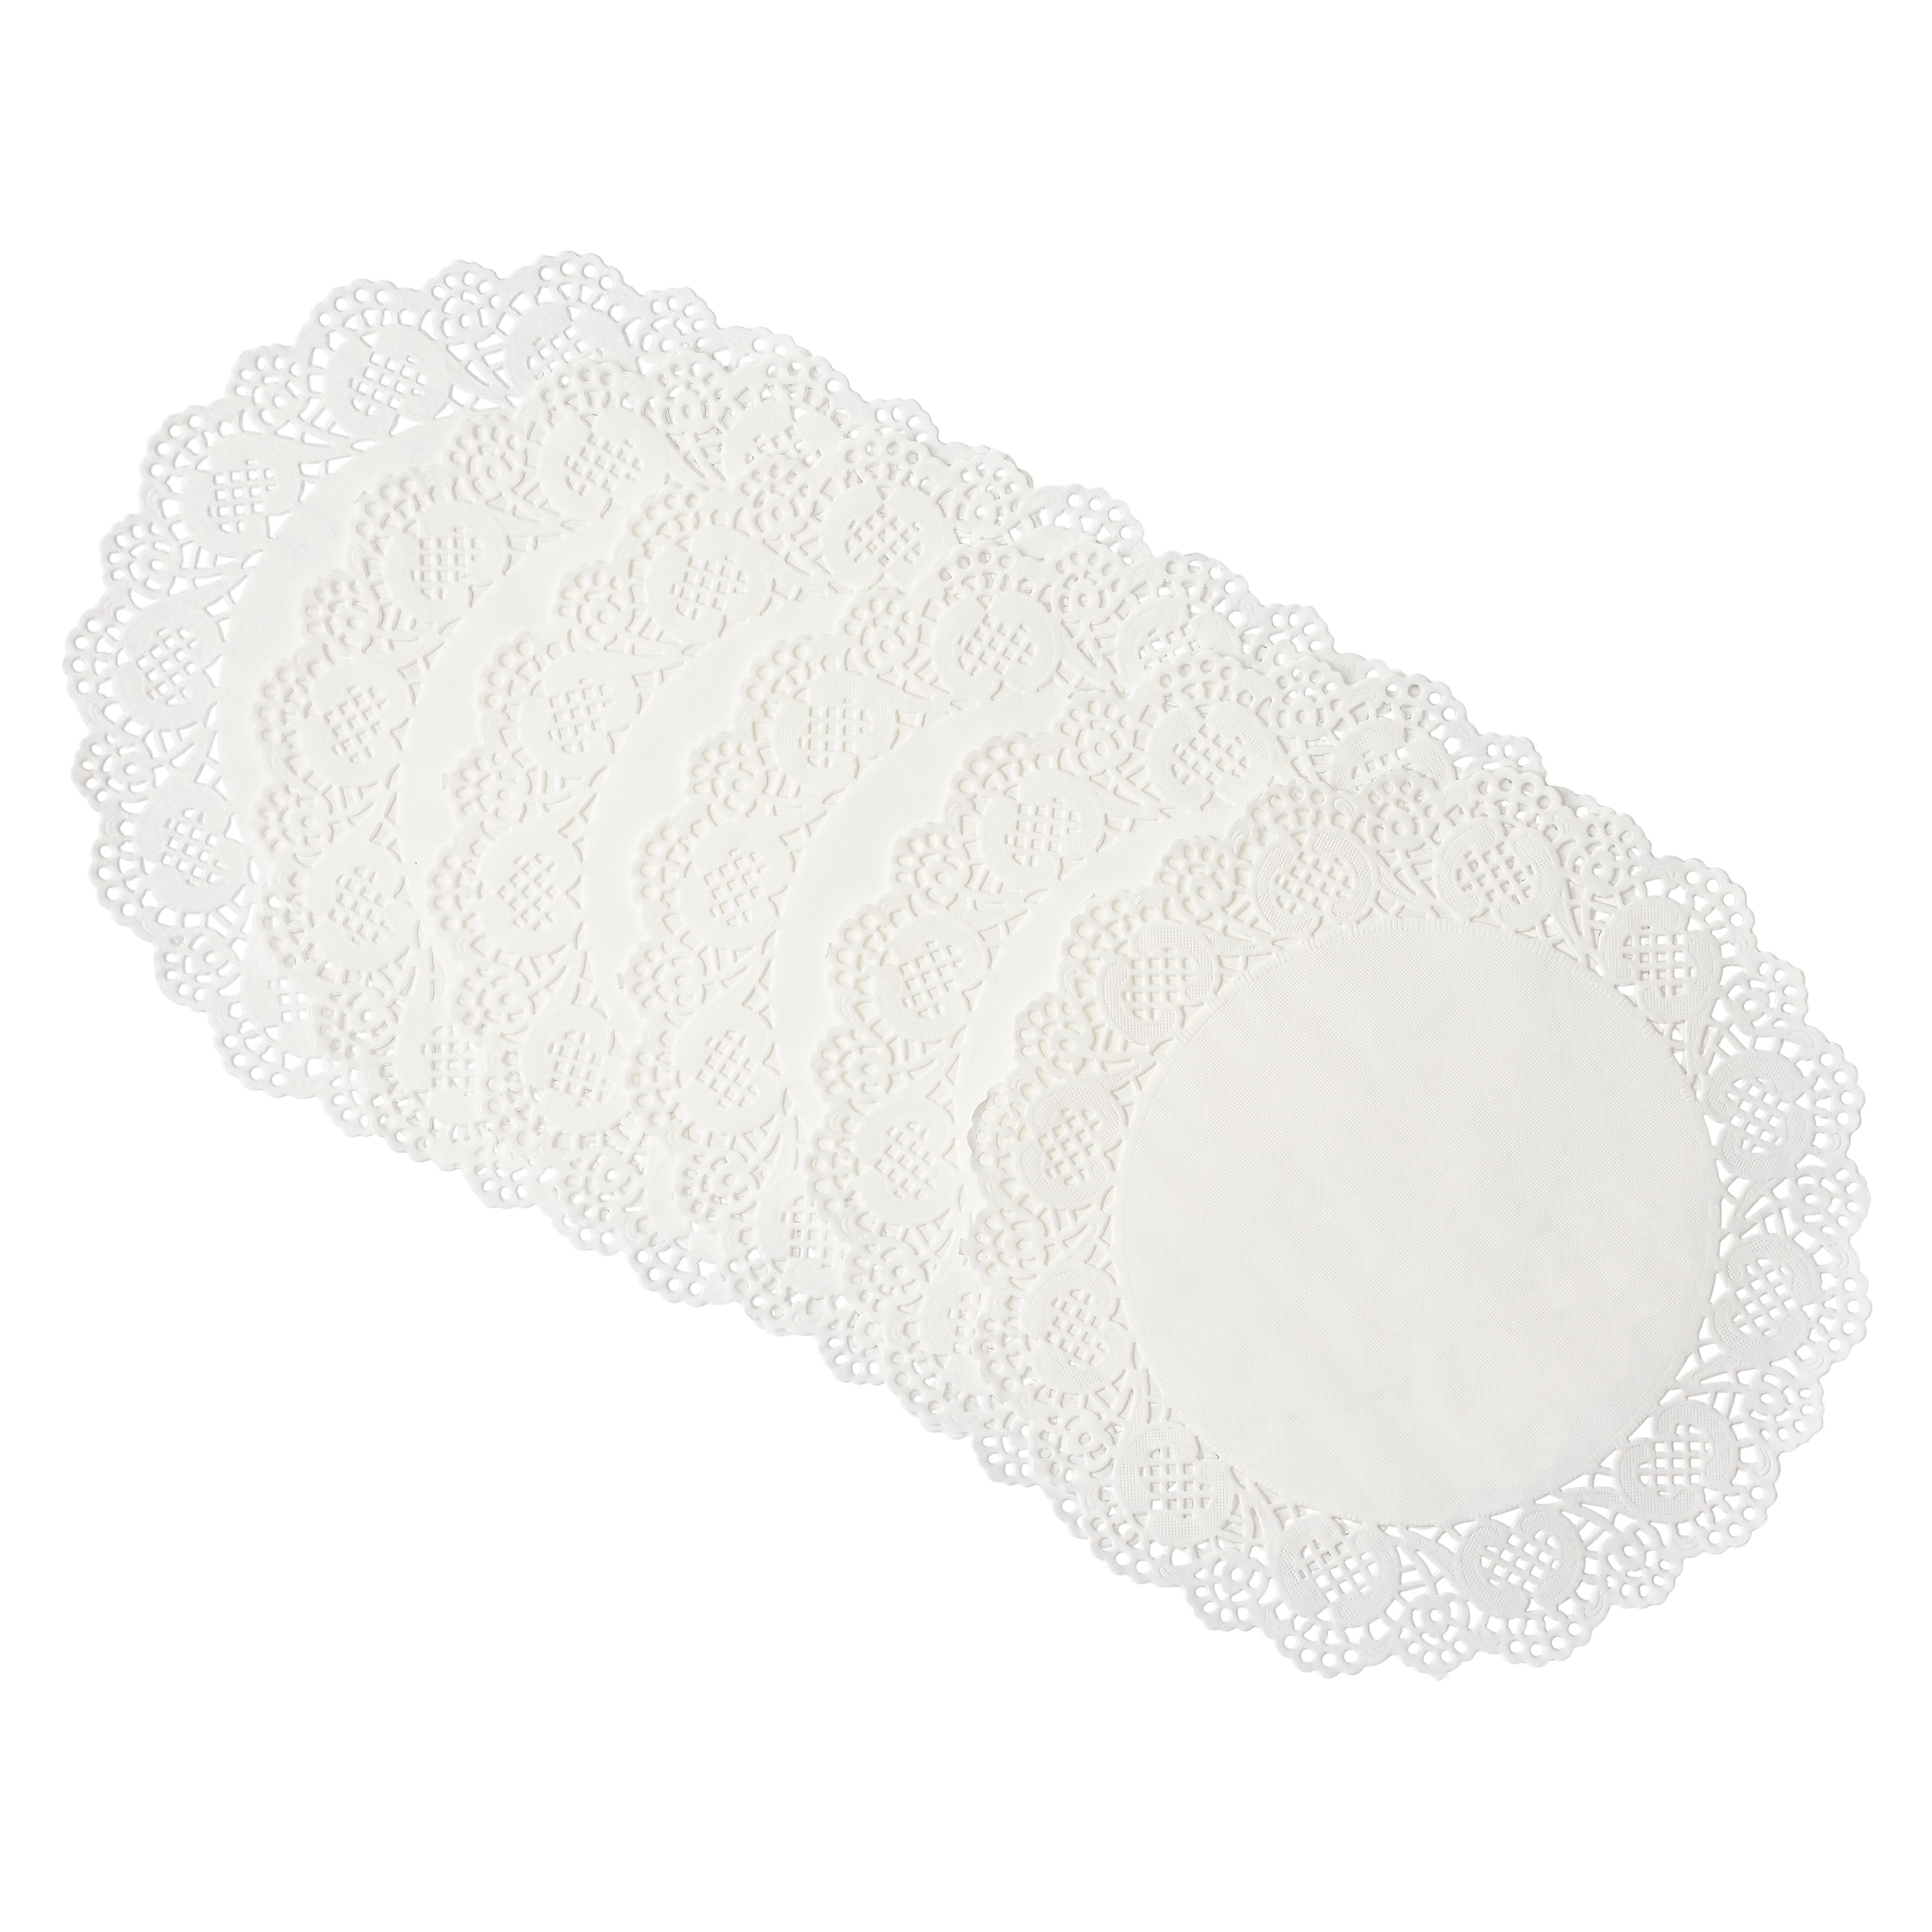 4 Paper Doilies by Celebrate It®